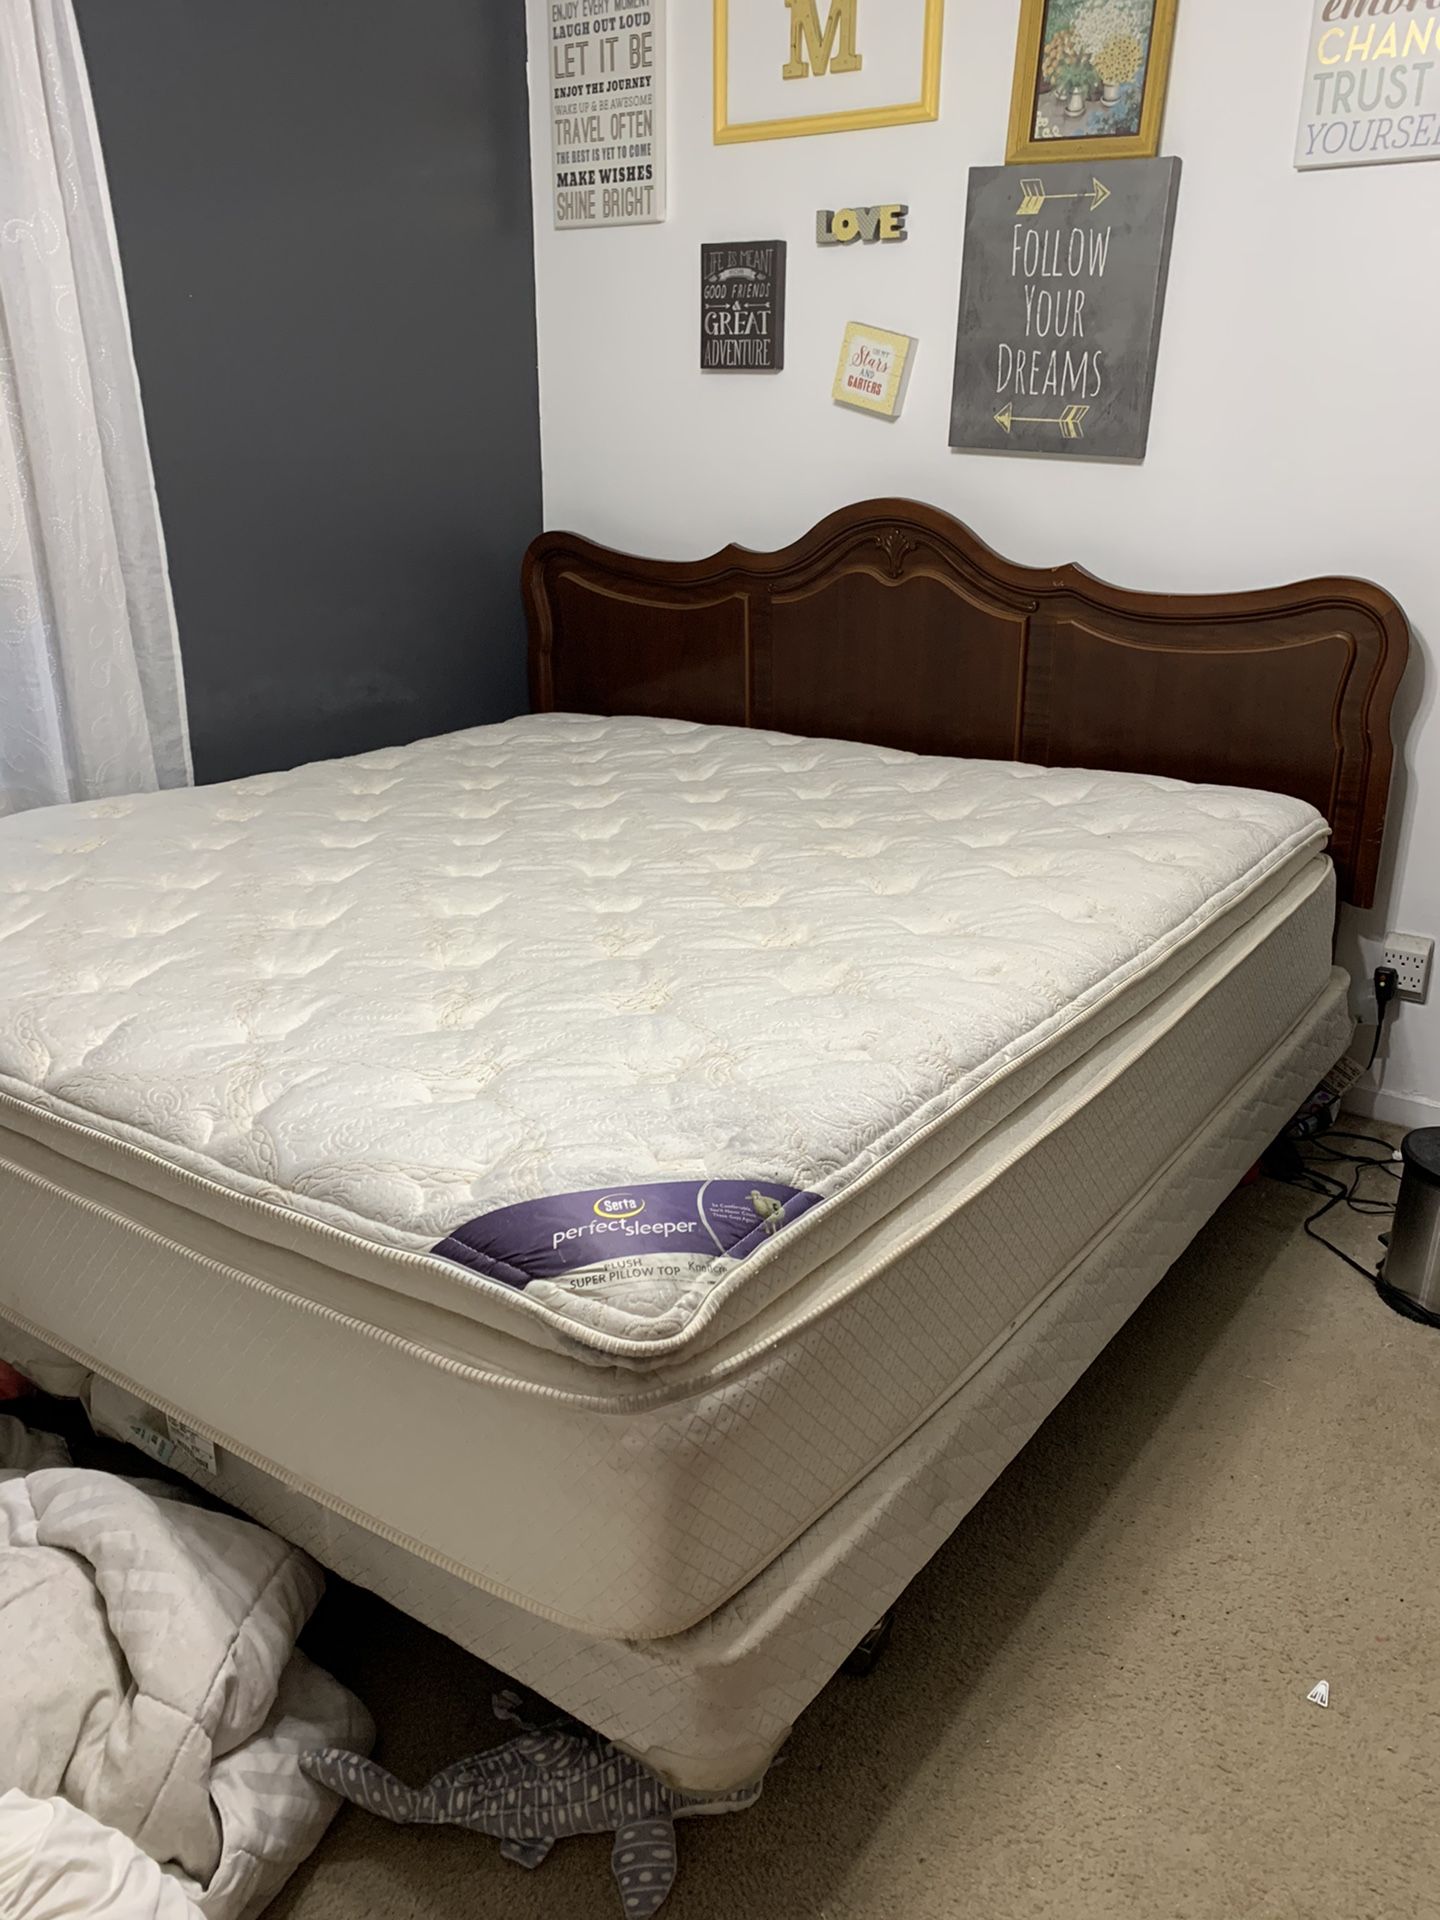 King sized bed (frame, headboard, and mattress)